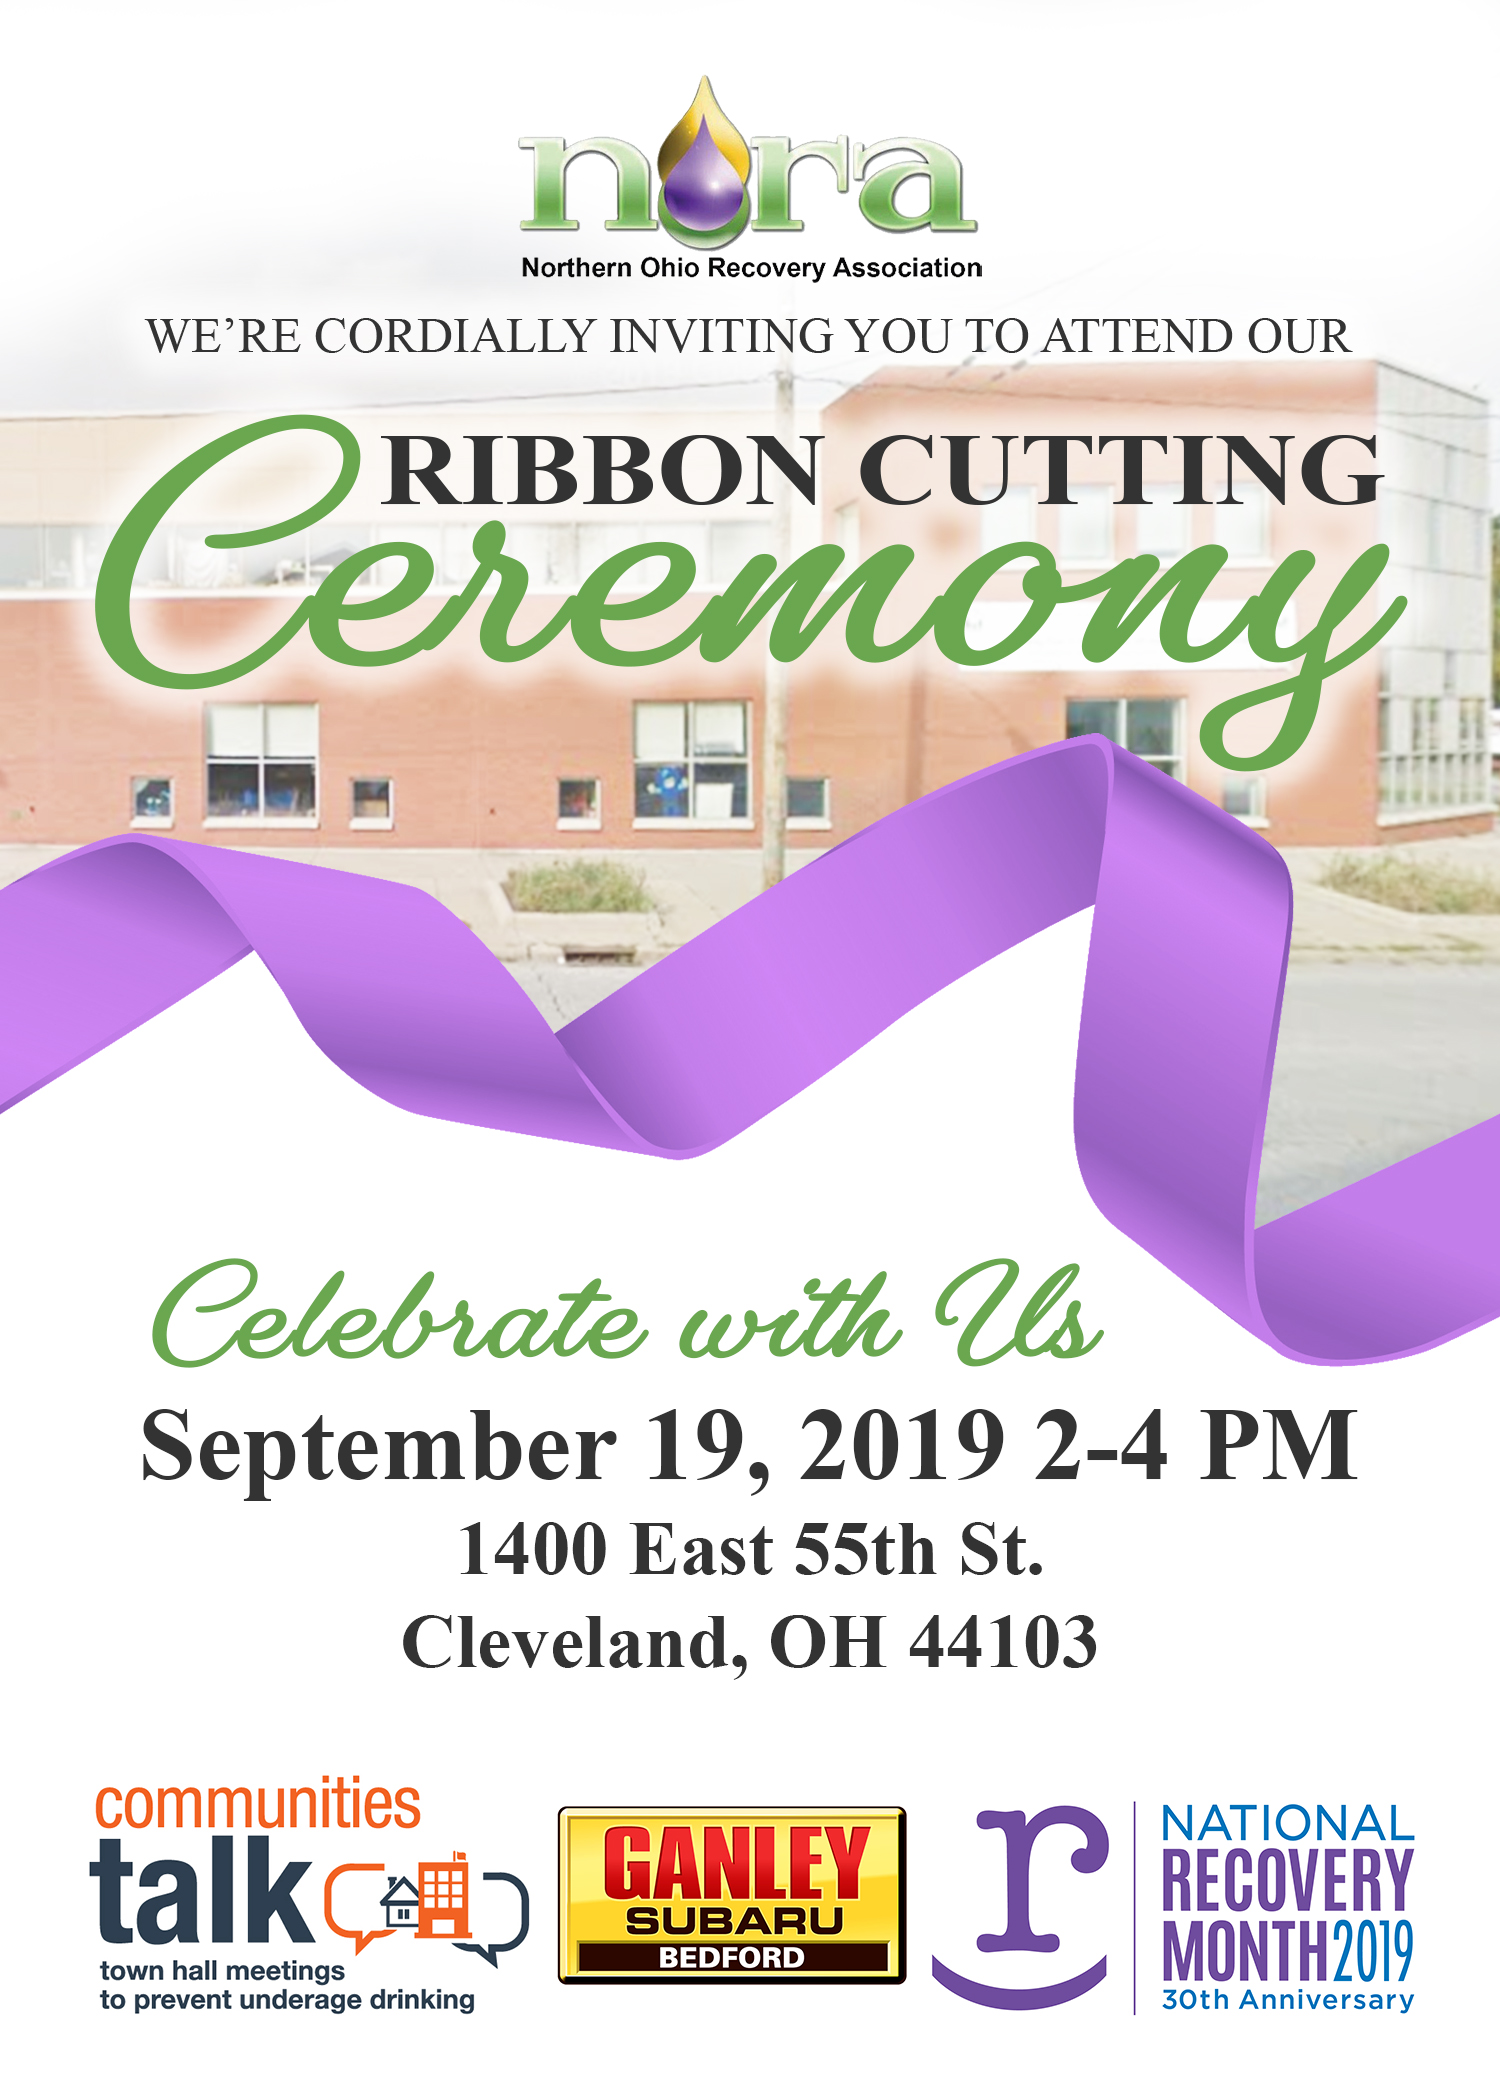 2019-20ribbon-20cutting-20save-20the-20date-20-205x7-20flyer-20-revised-2-20-1-1.jpg